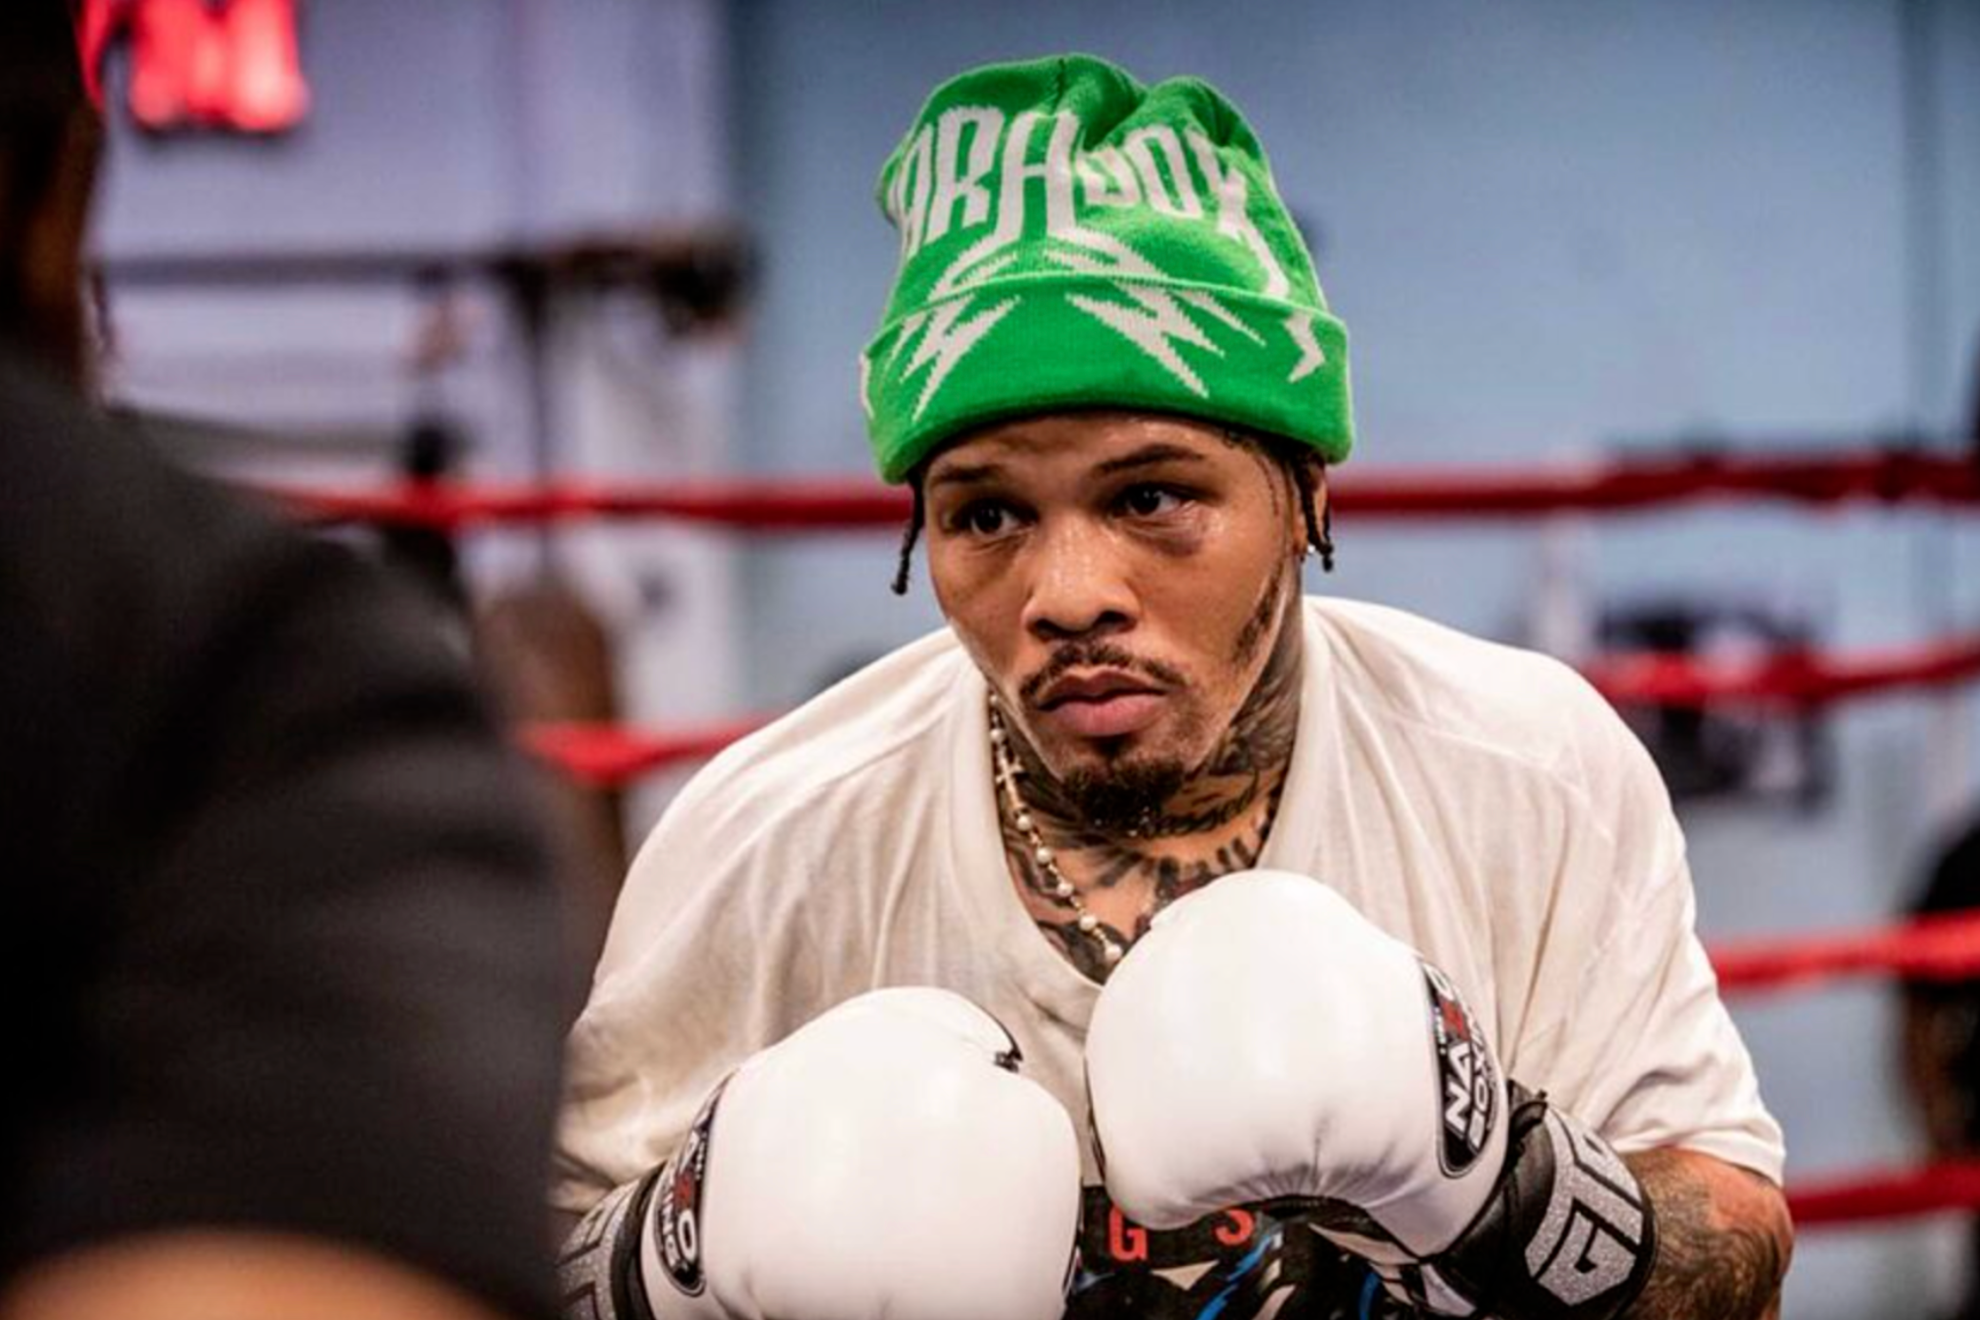 Gervonta Davis receives the best news and fulfills his dream of the Olympic Games, but in a different way